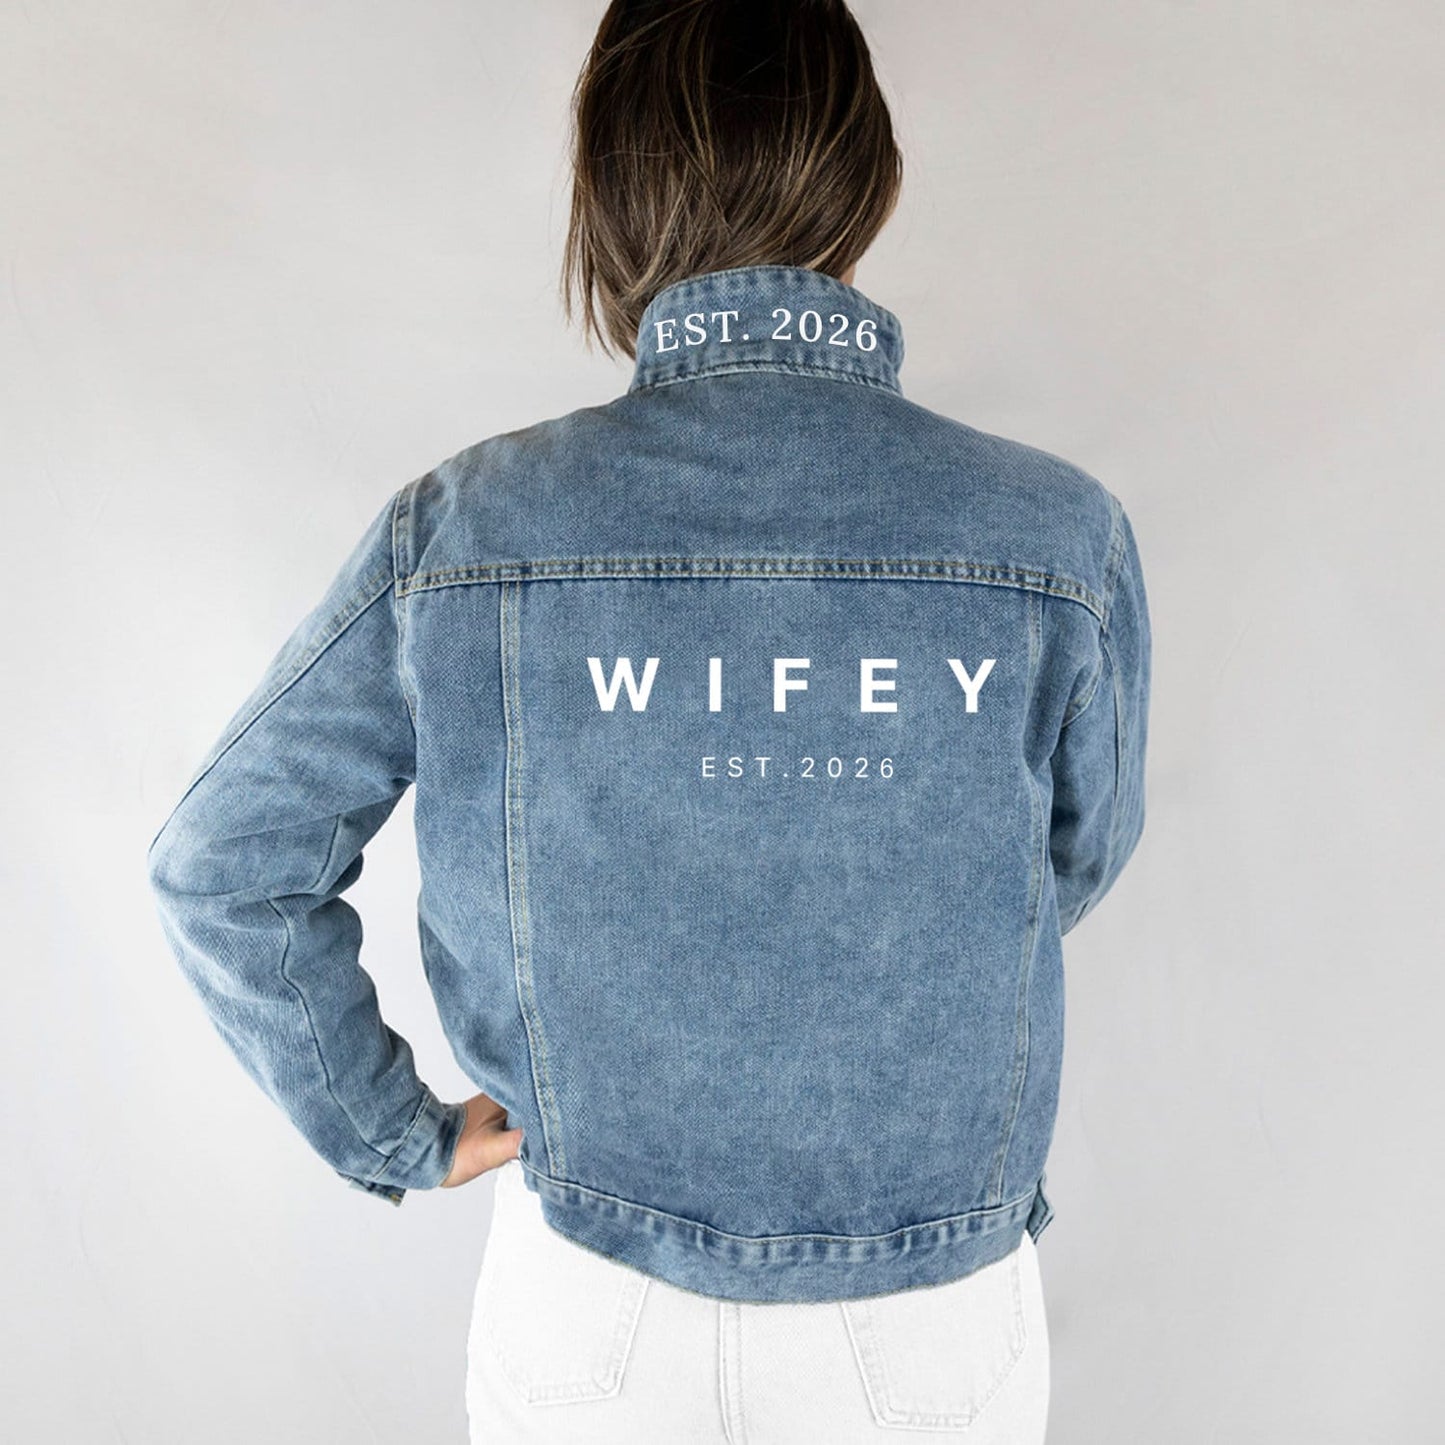 Personalized Jean Jacket for Bride